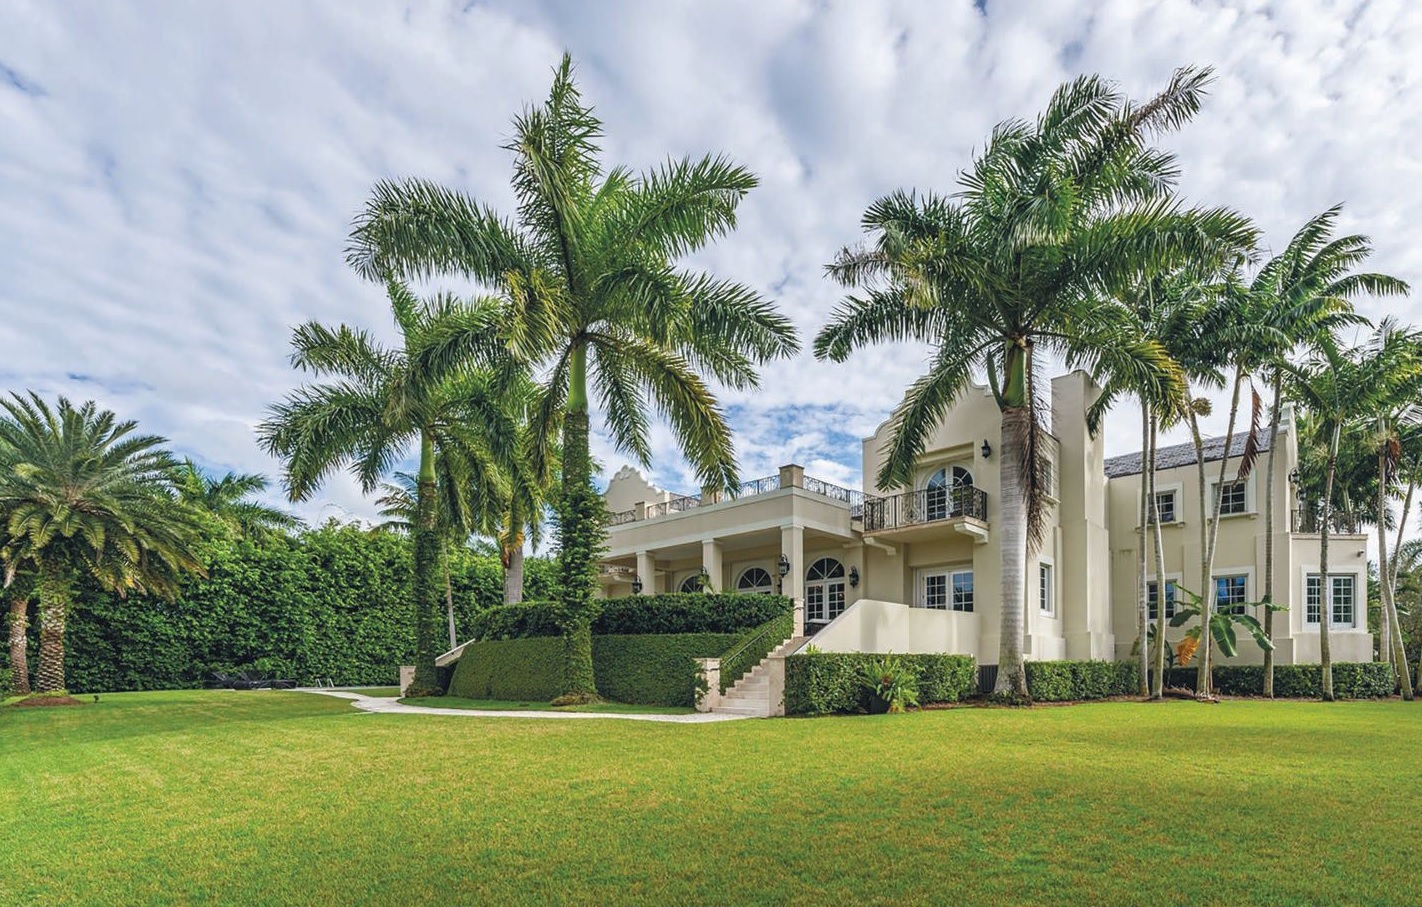 view of the gorgeous Coral Gables home PHOTO COURTESY OF THE JILLS ZEDER GROUP/1OAK STUDIOS